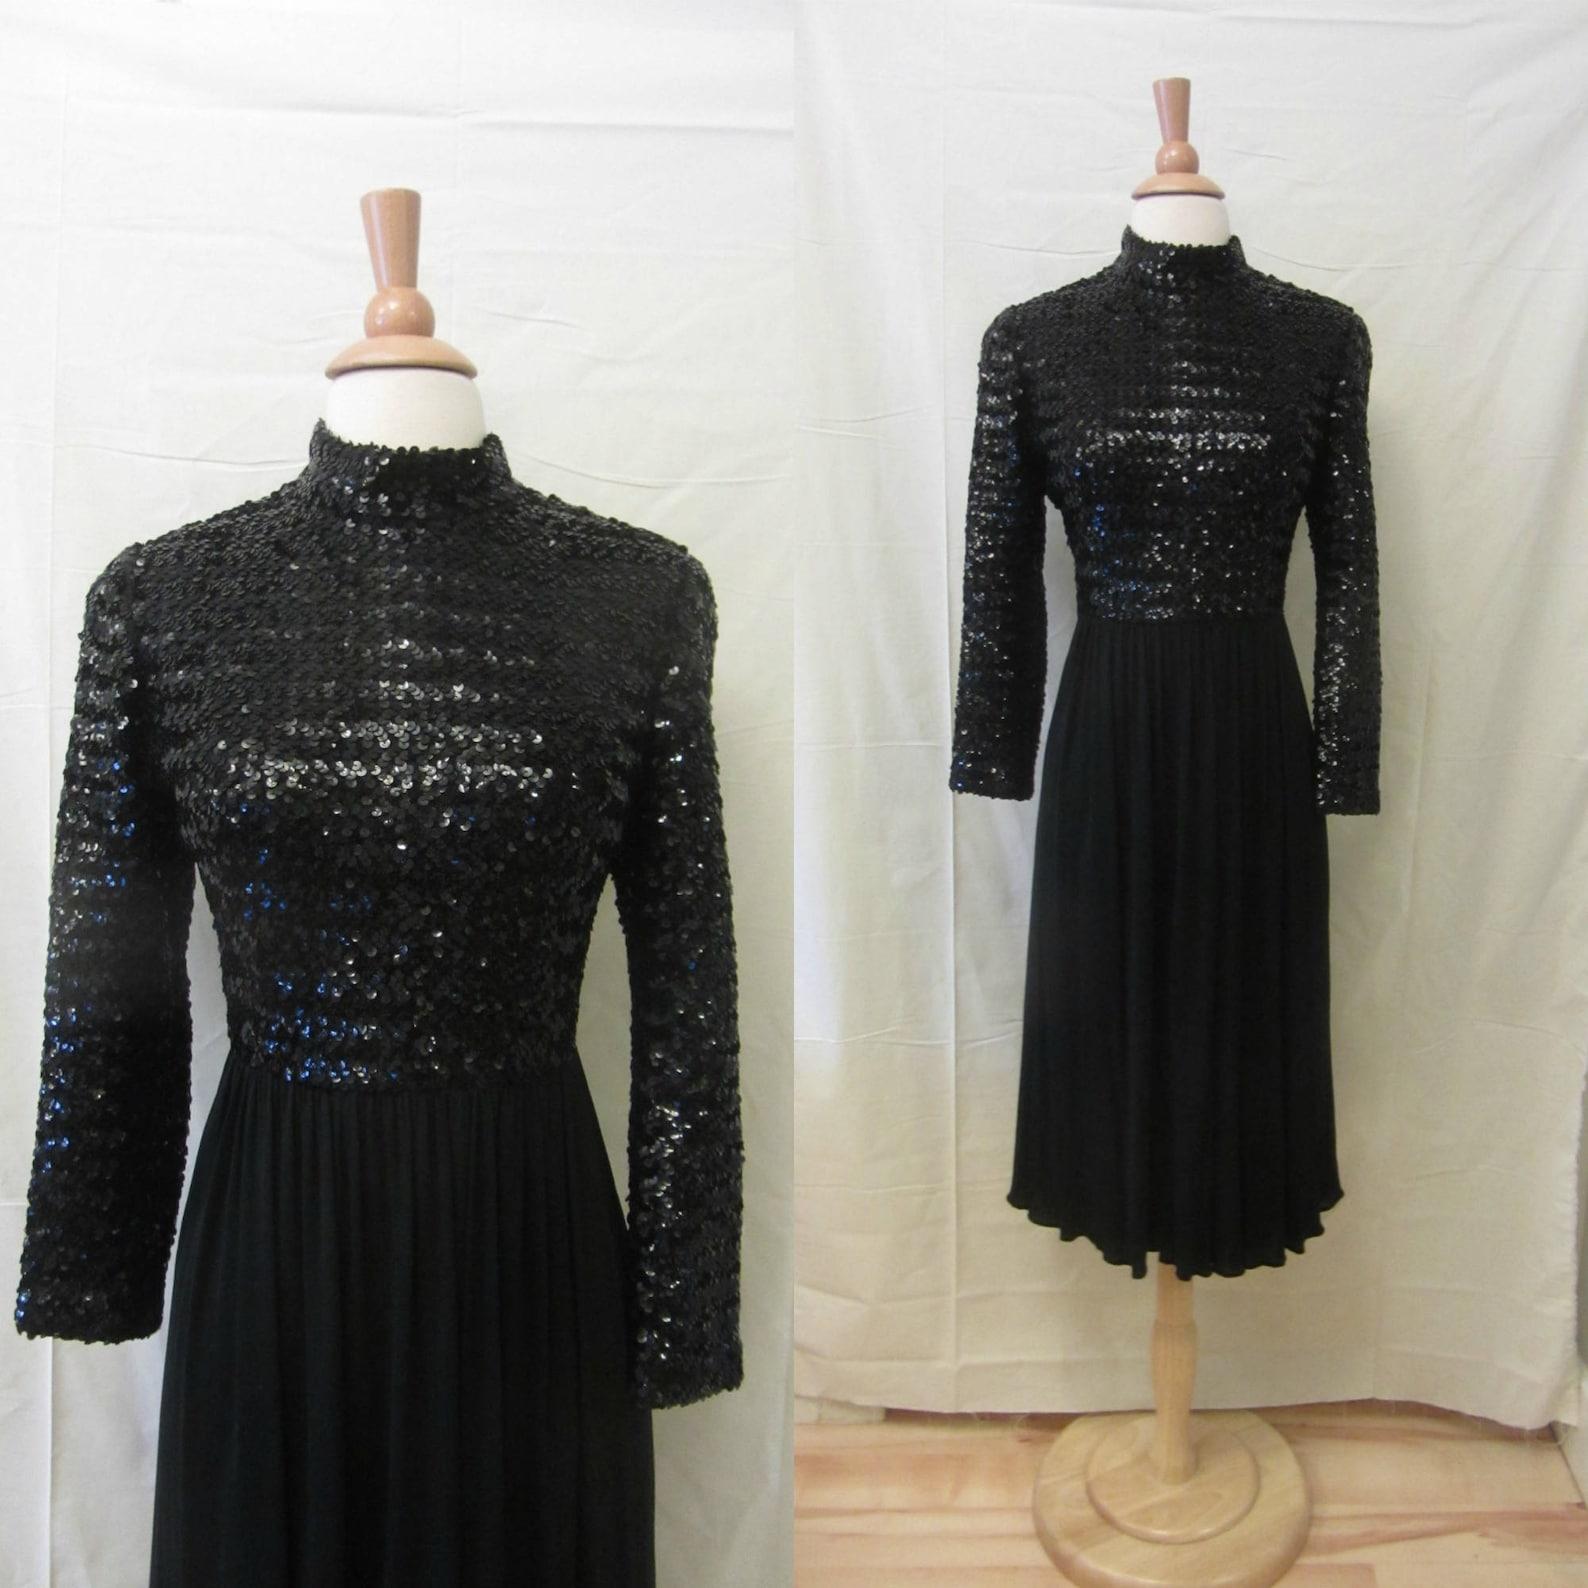 1960s Saks Fifth Avenue black cocktail dress
Paillette sequin knit bodice
mock neck collar
long sleeves
free flowing double layered jersey skirt
falls to just below knee length
bodice is lined
back zip closure

✂----------------------
Bust